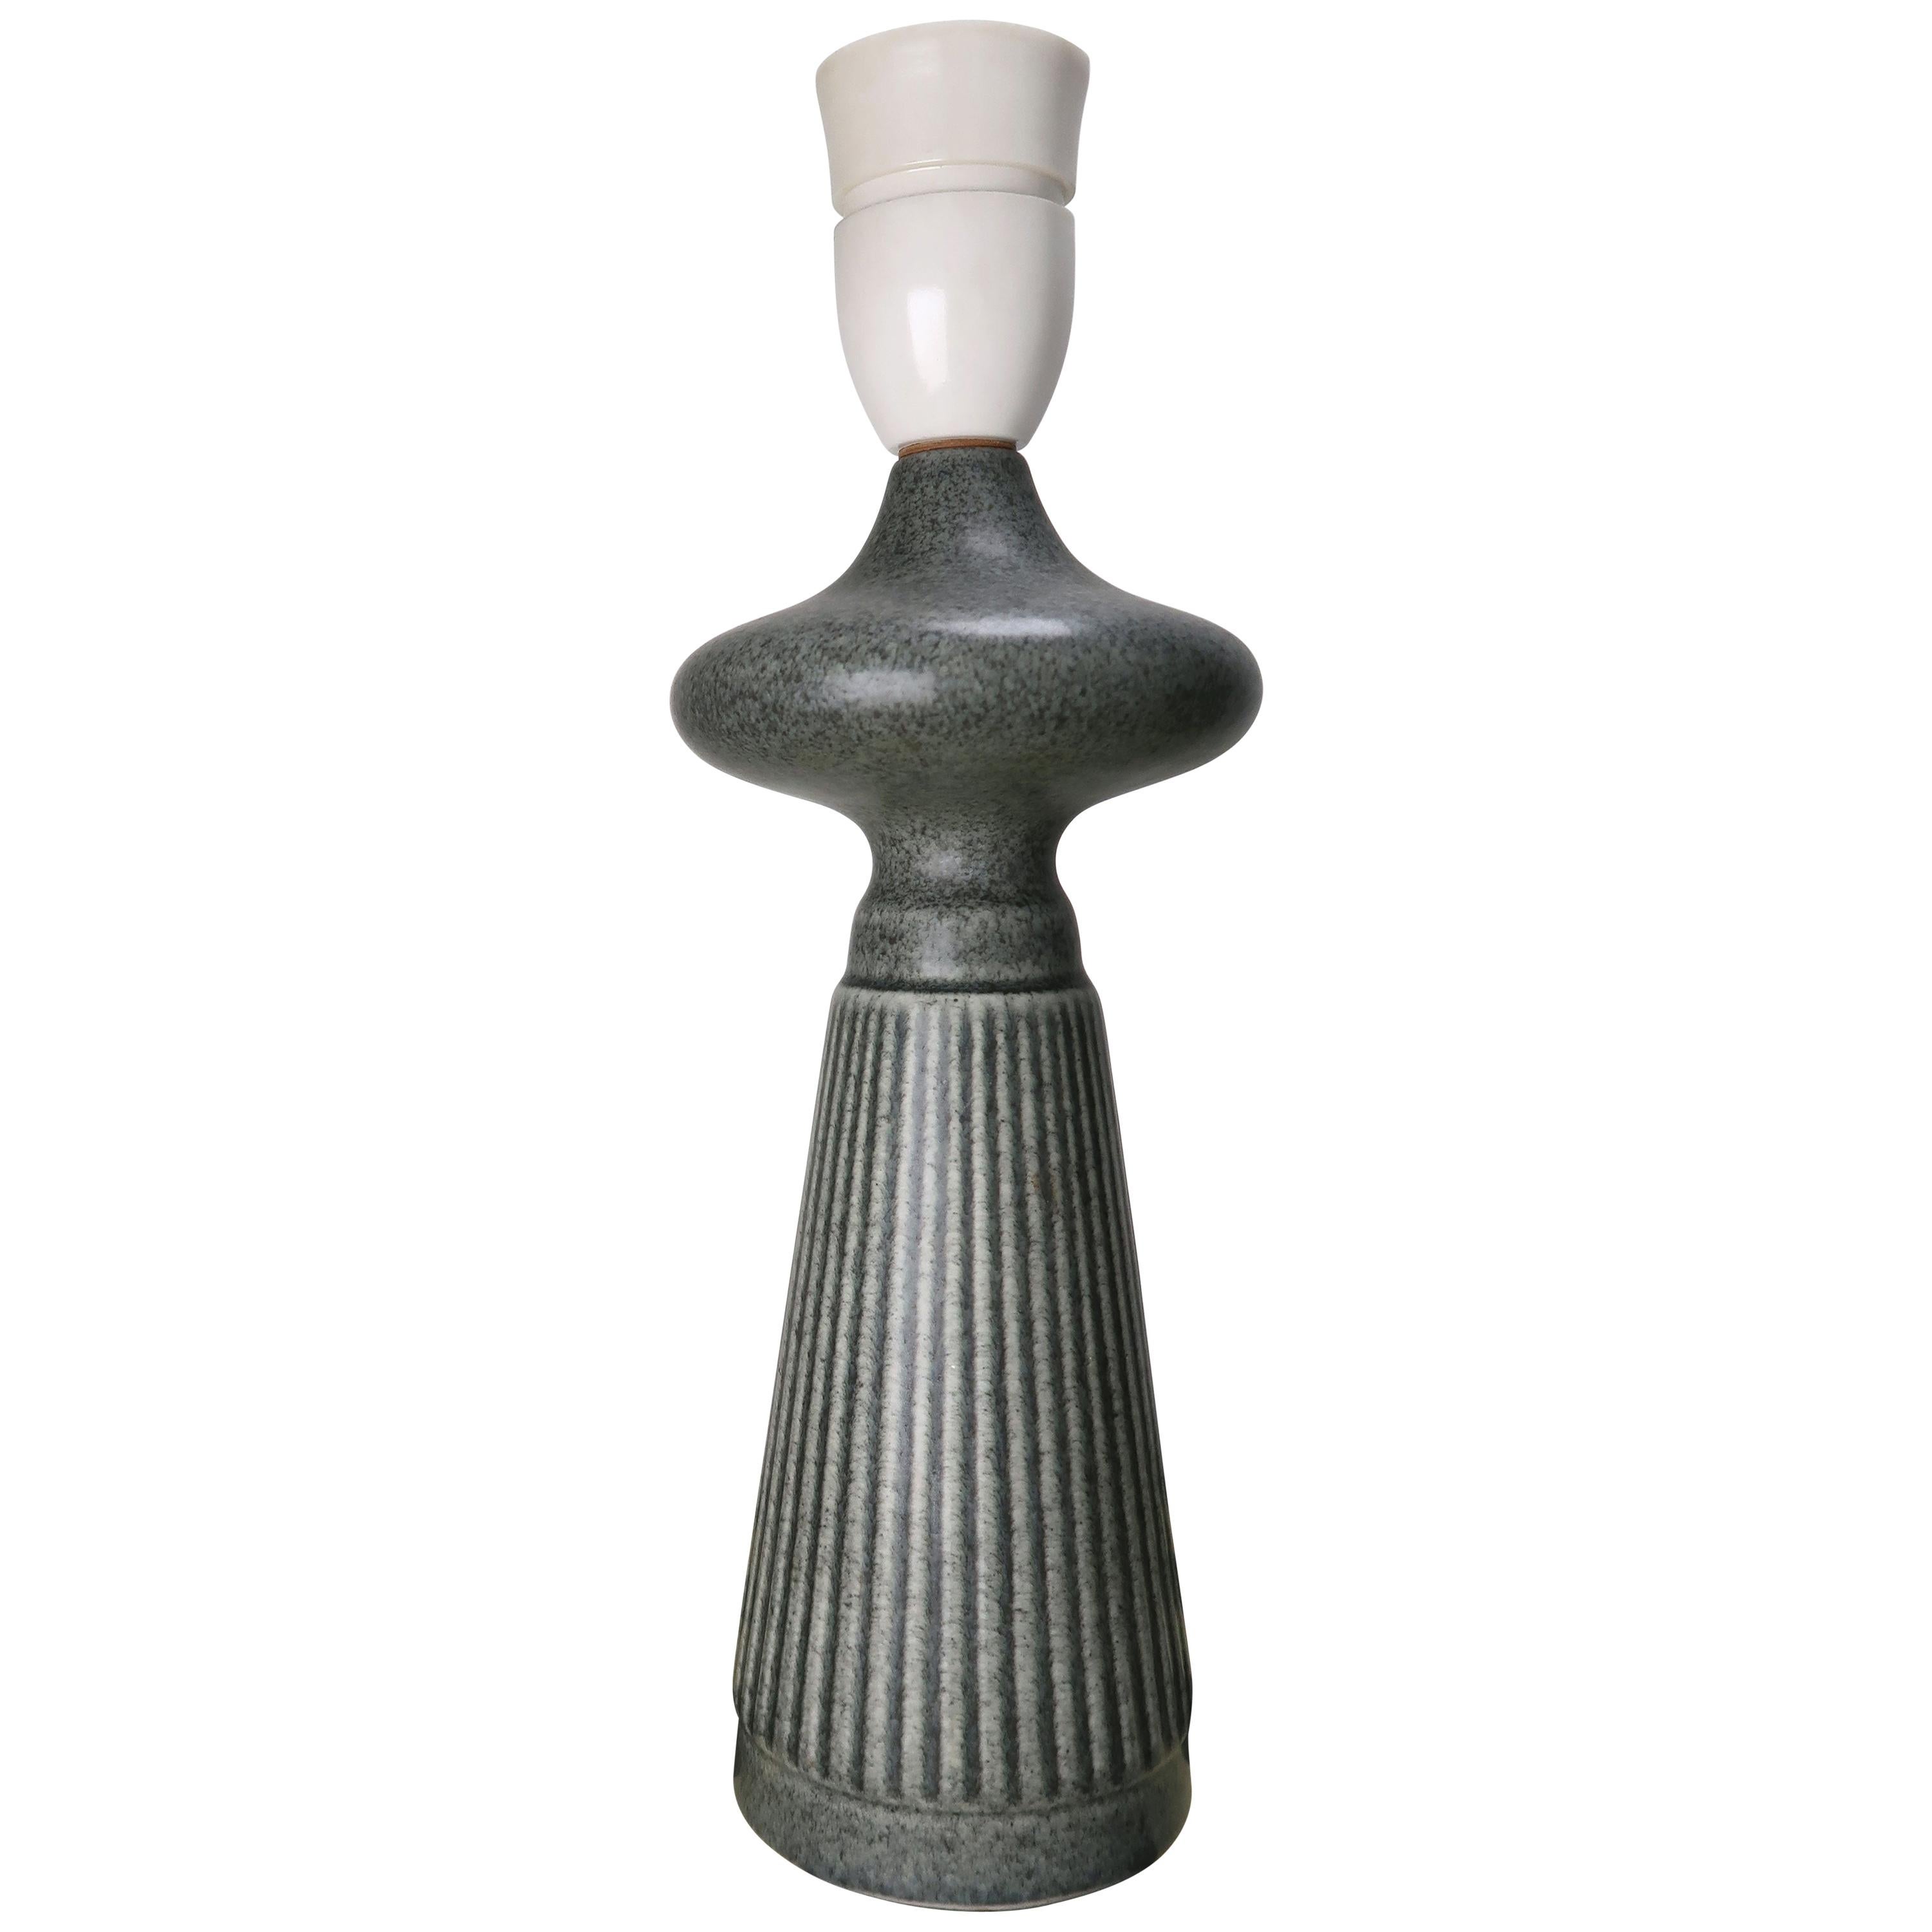 Danish Modern Pewter Green Ceramic Table Lamp by Søholm, 1960s